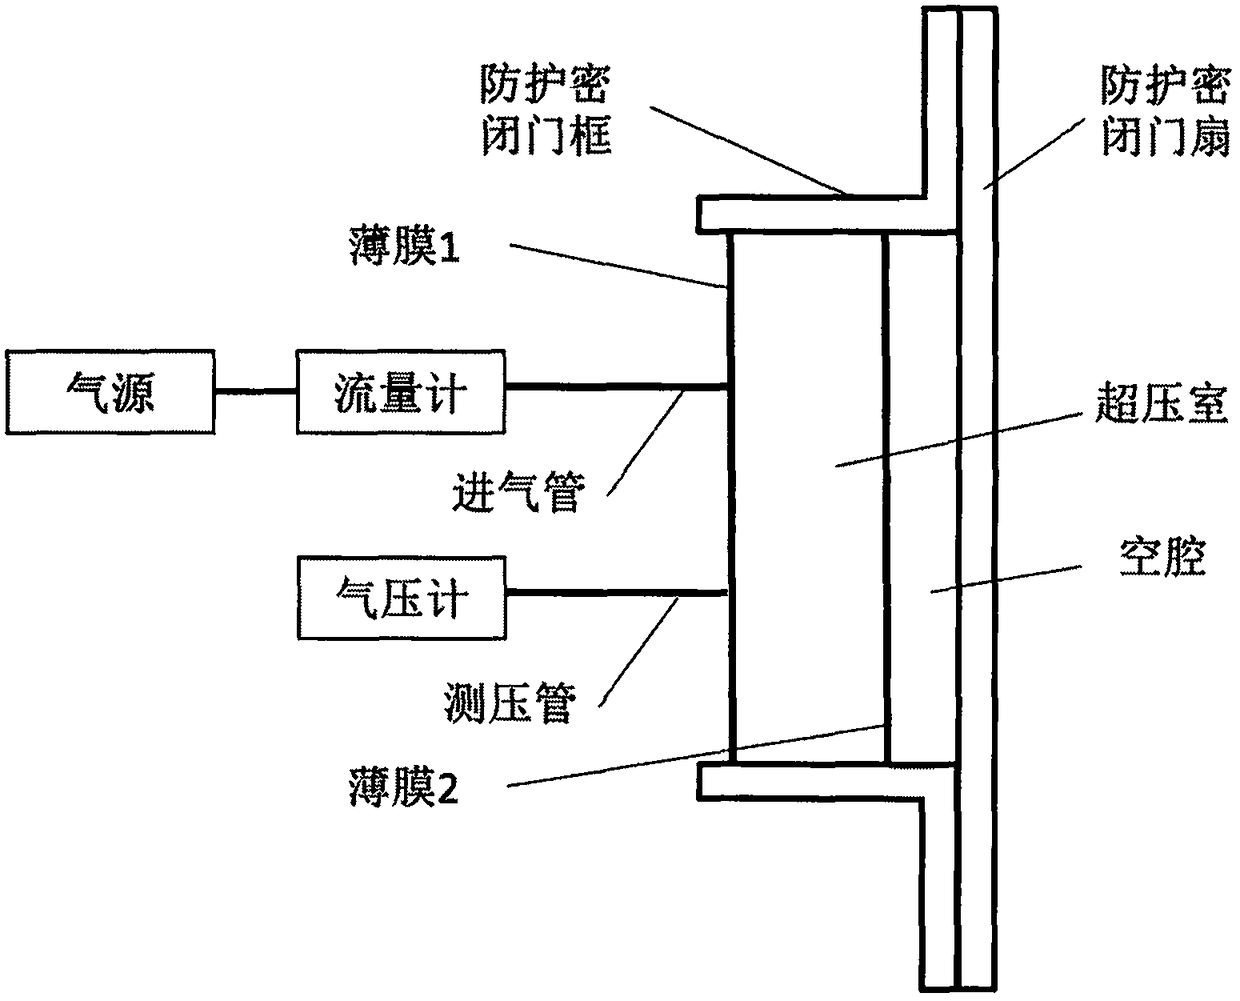 Sealing performance detection method for single-frame protection air-tight door